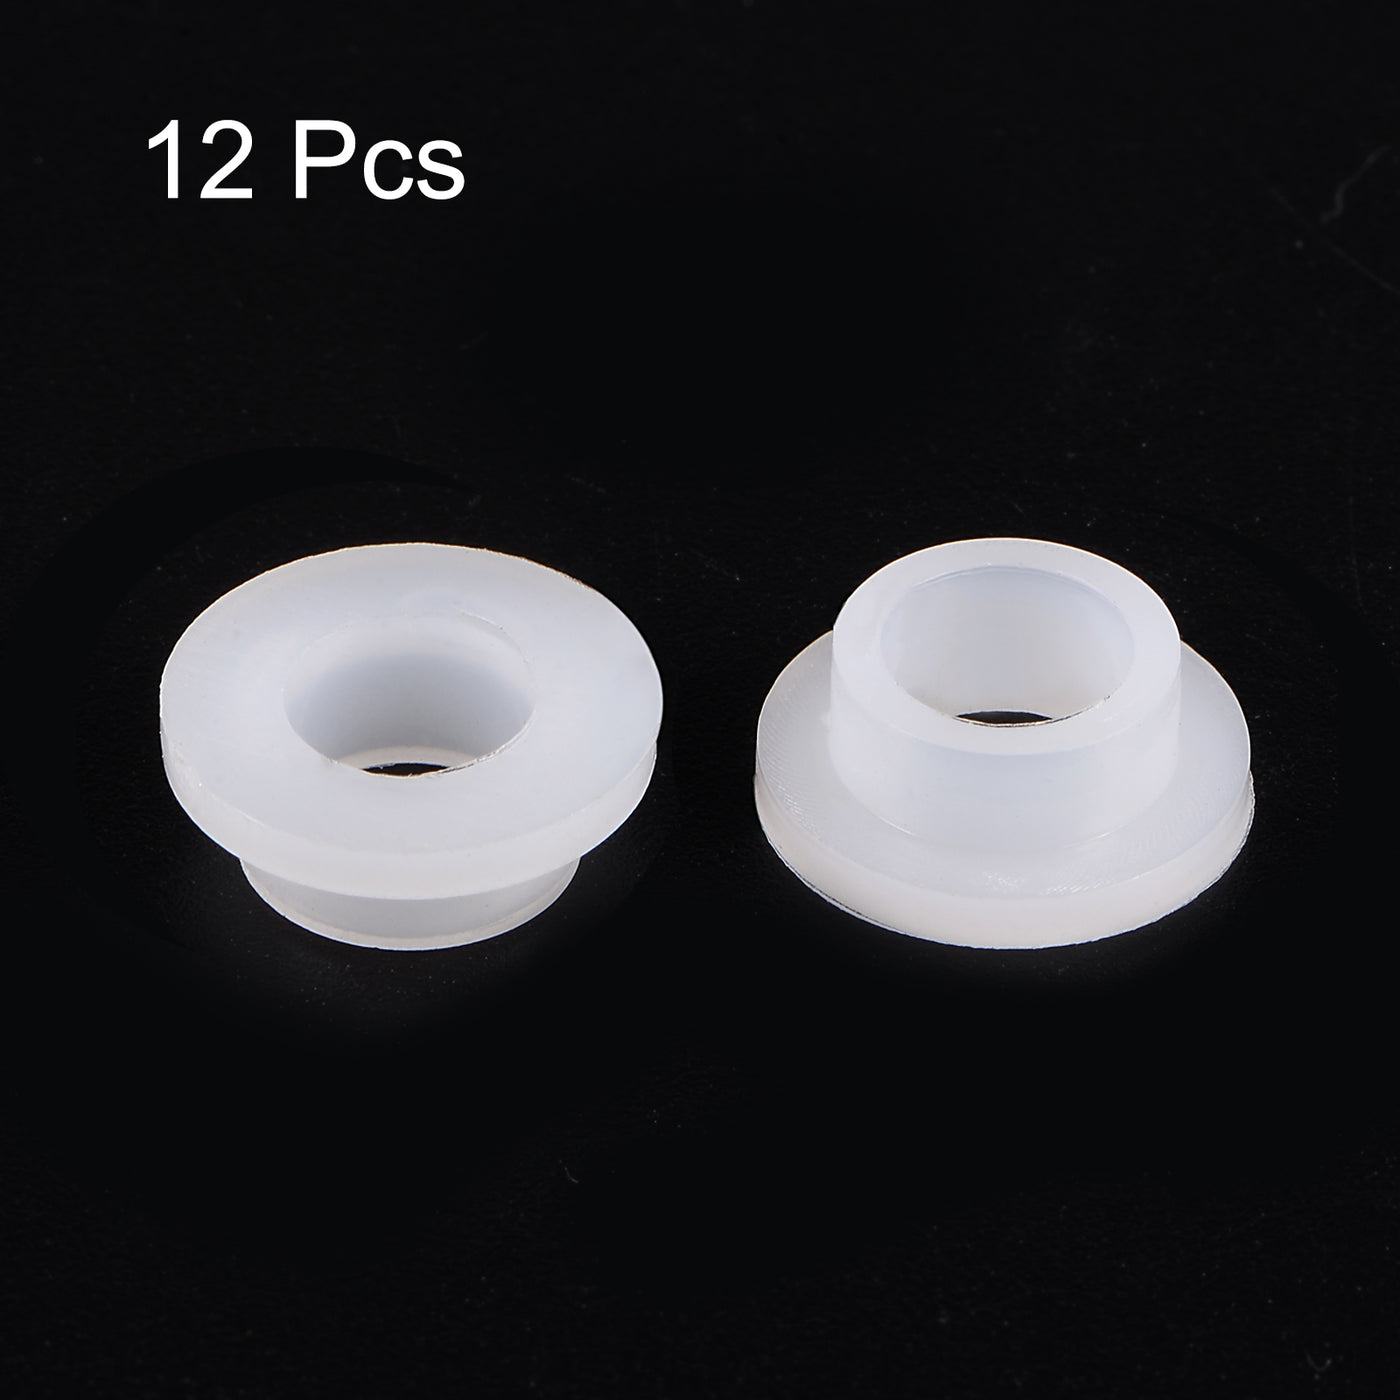 uxcell Uxcell 12pcs Flanged Sleeve Bearings 6.2mm ID 8.4mm OD 4.5mm Length Nylon Bushing White